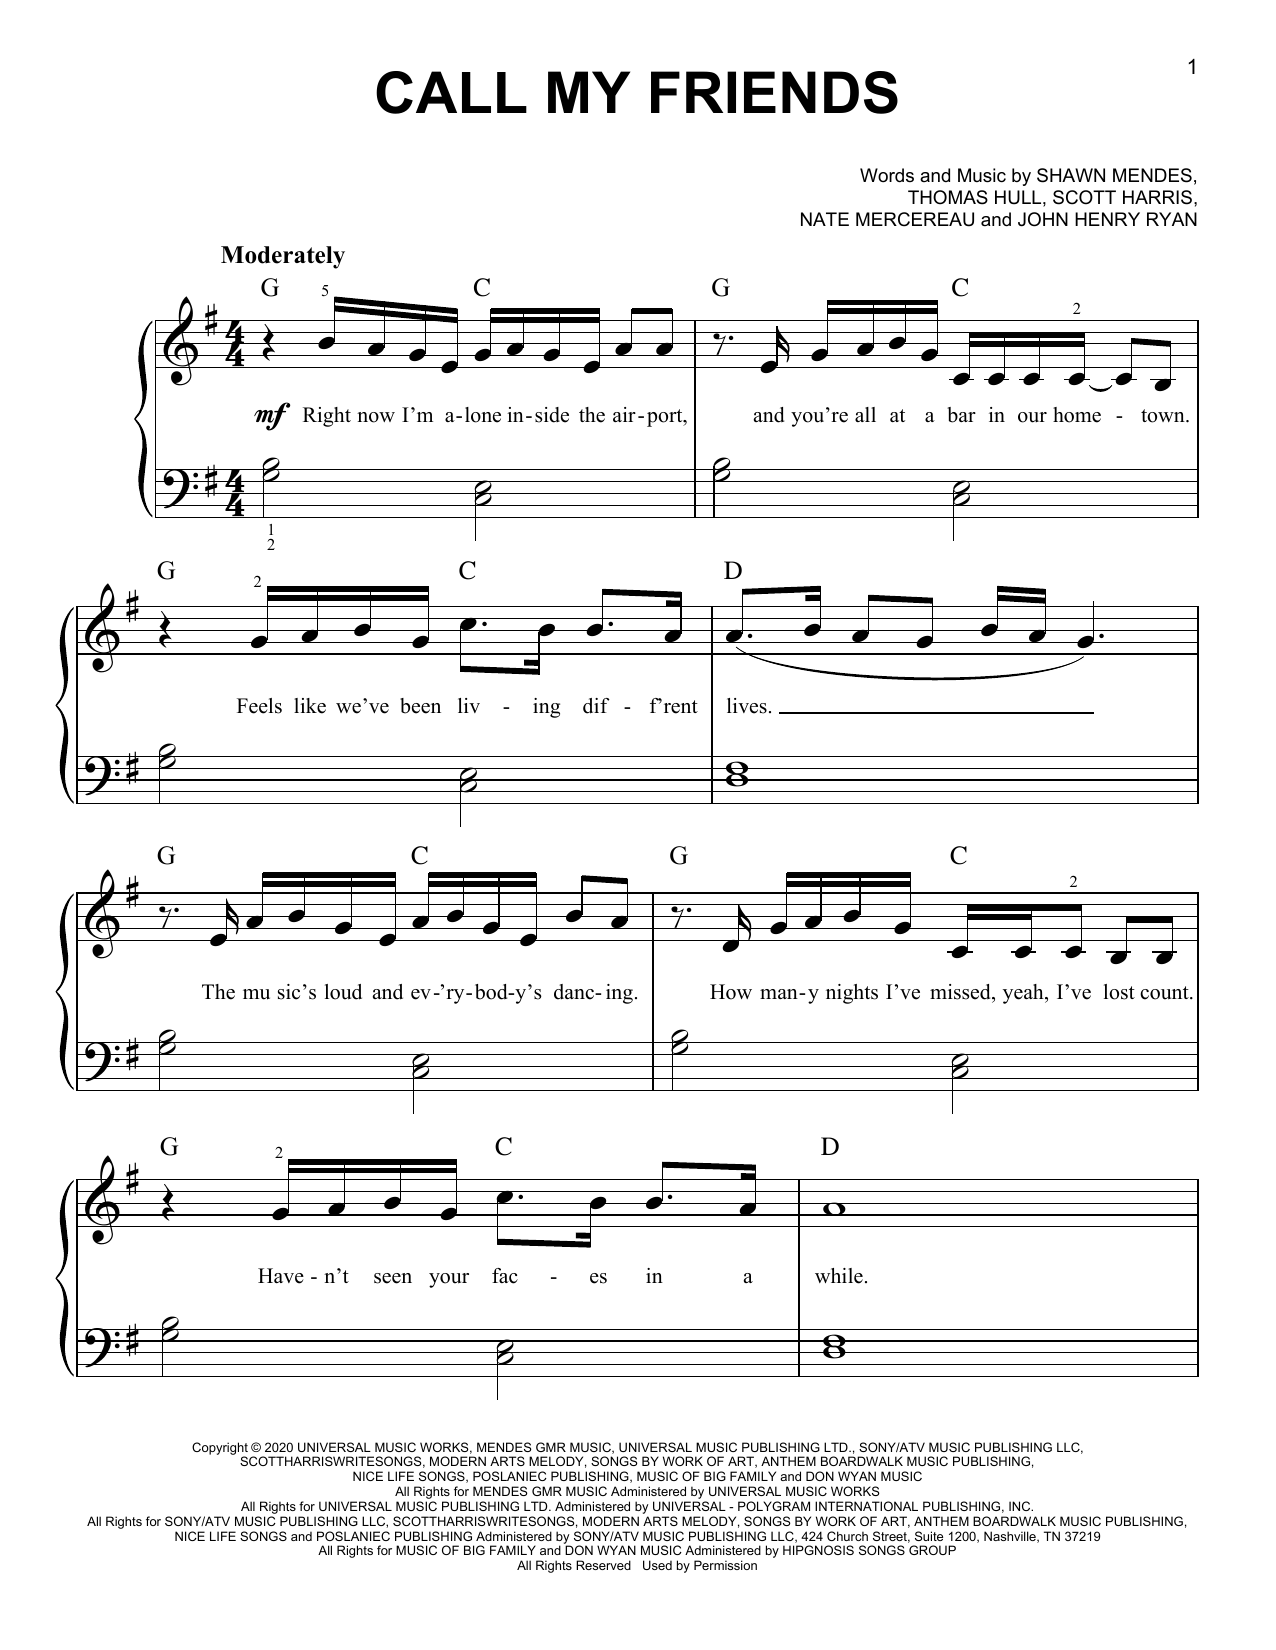 Download Shawn Mendes Call My Friends Sheet Music